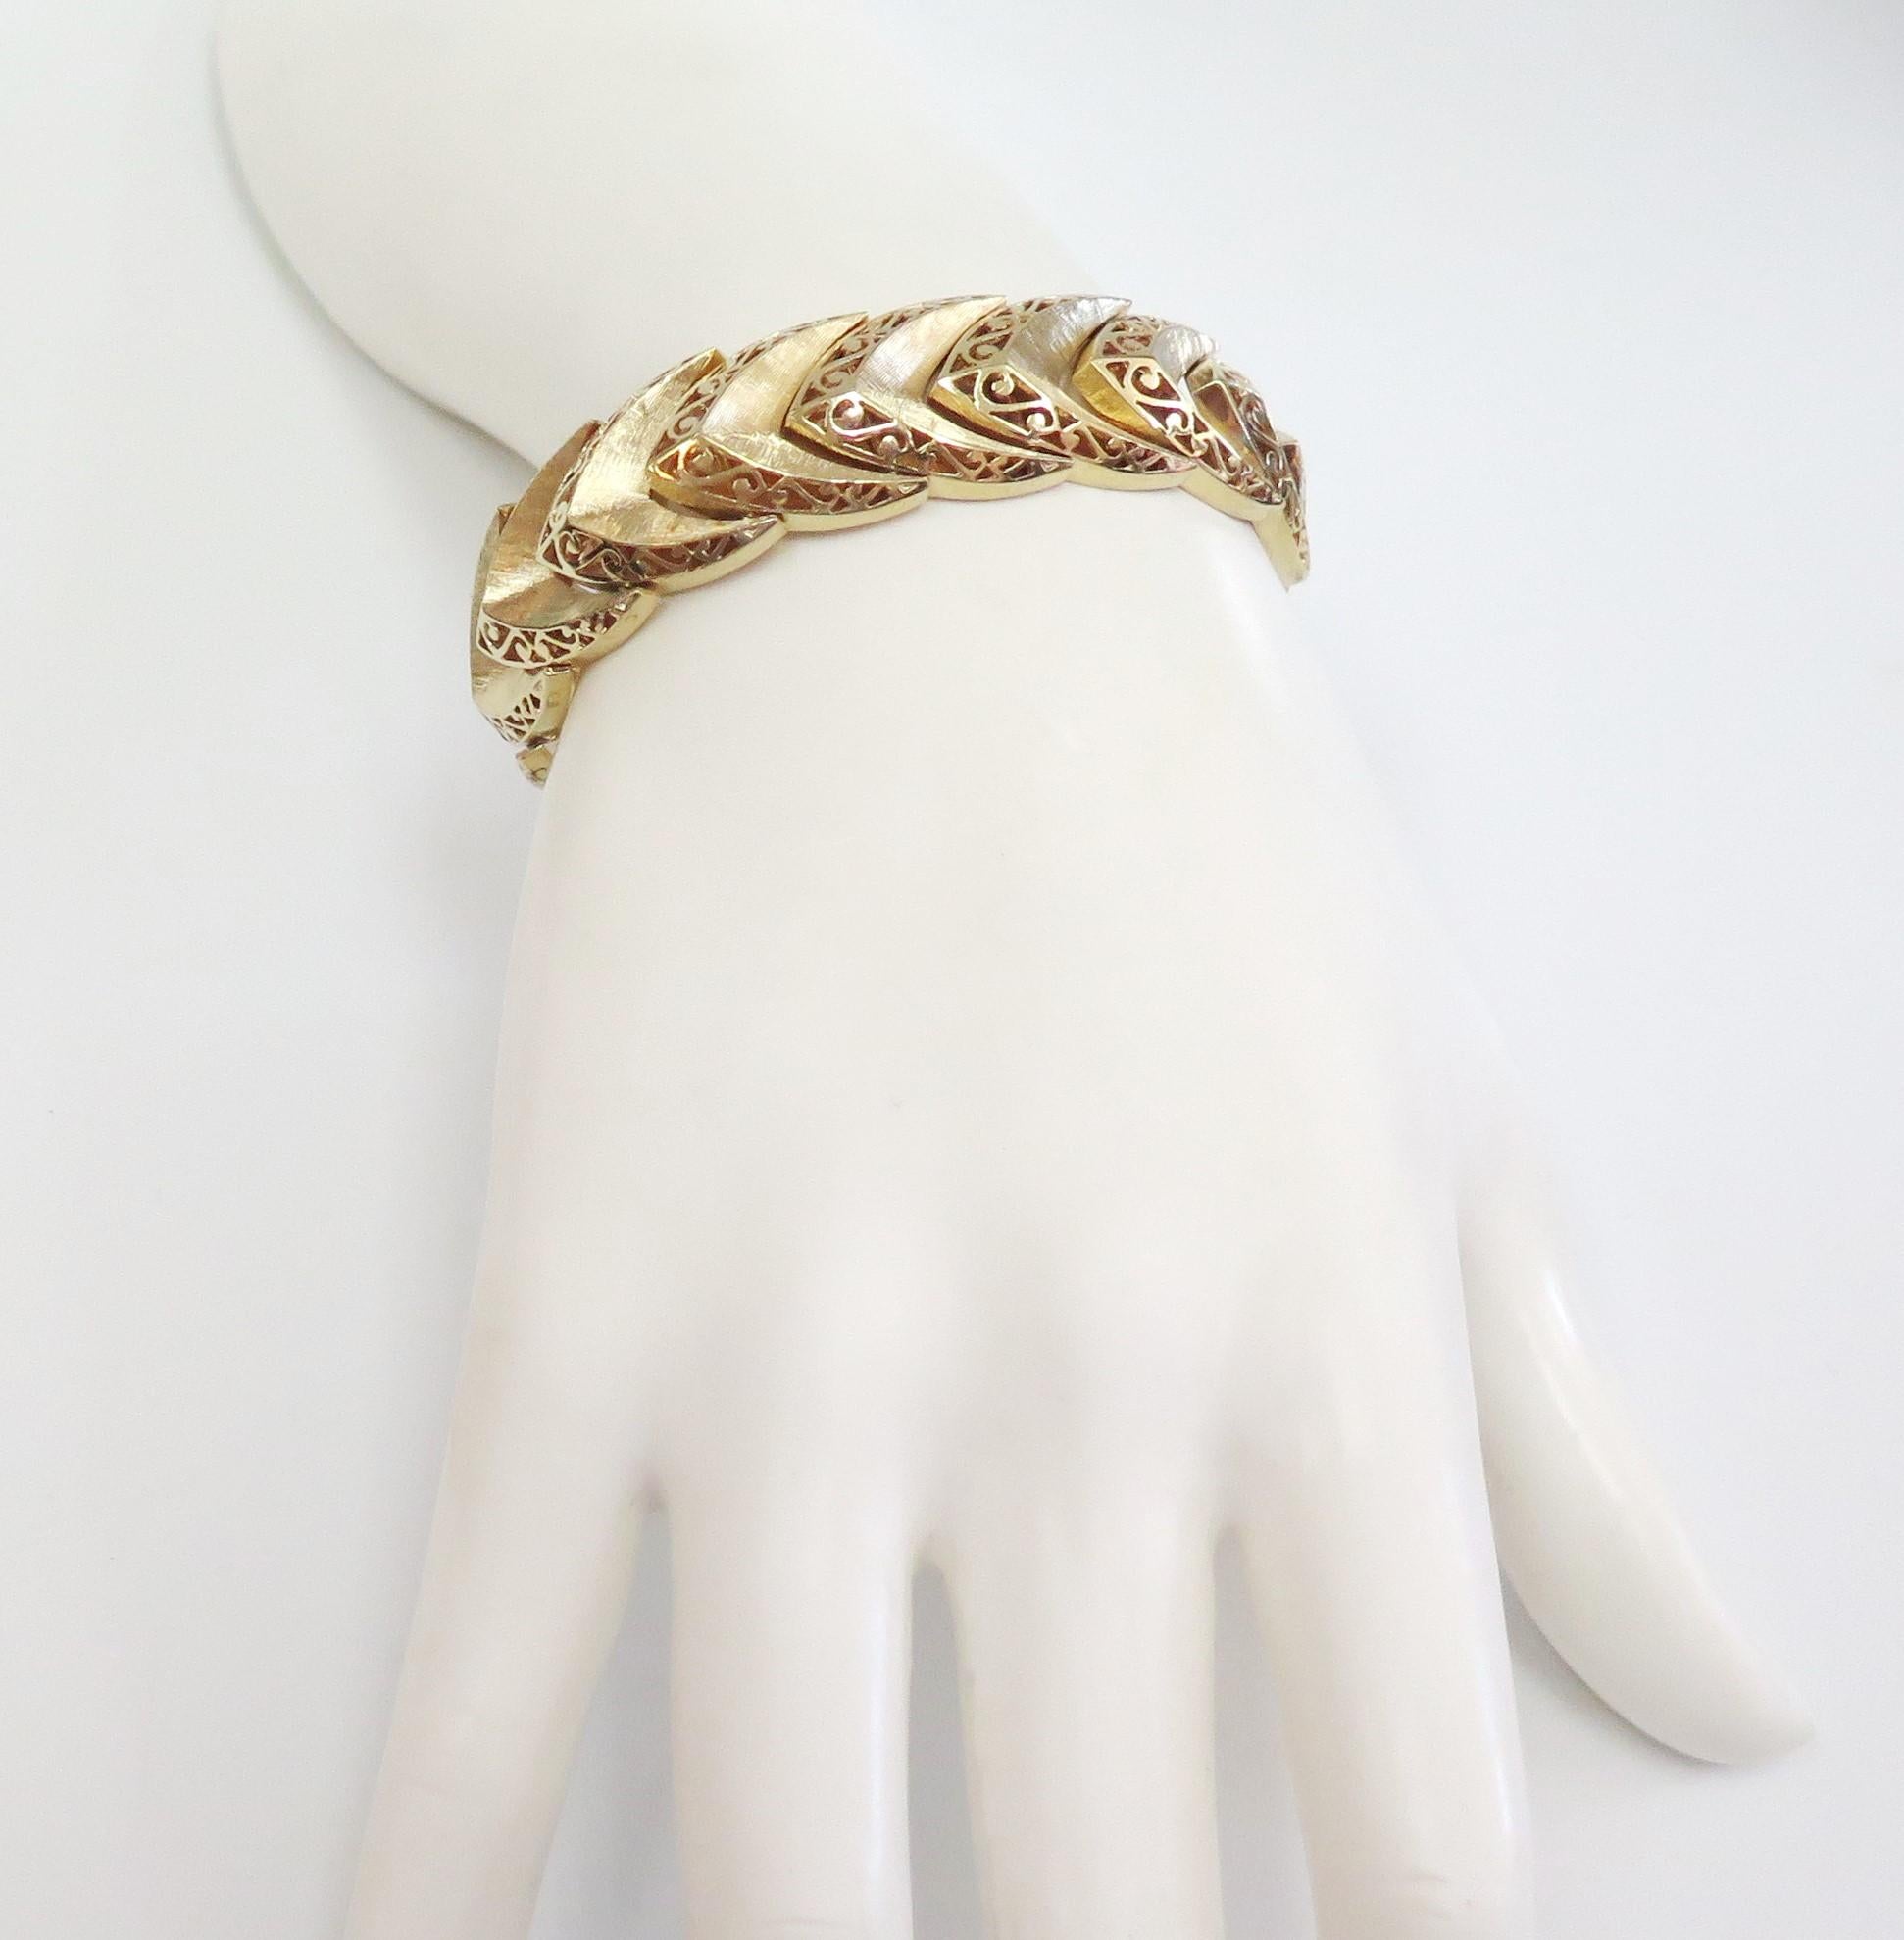 Wide Bracelet with Chevron and Scroll Design, 14 Karat Yellow Gold 5